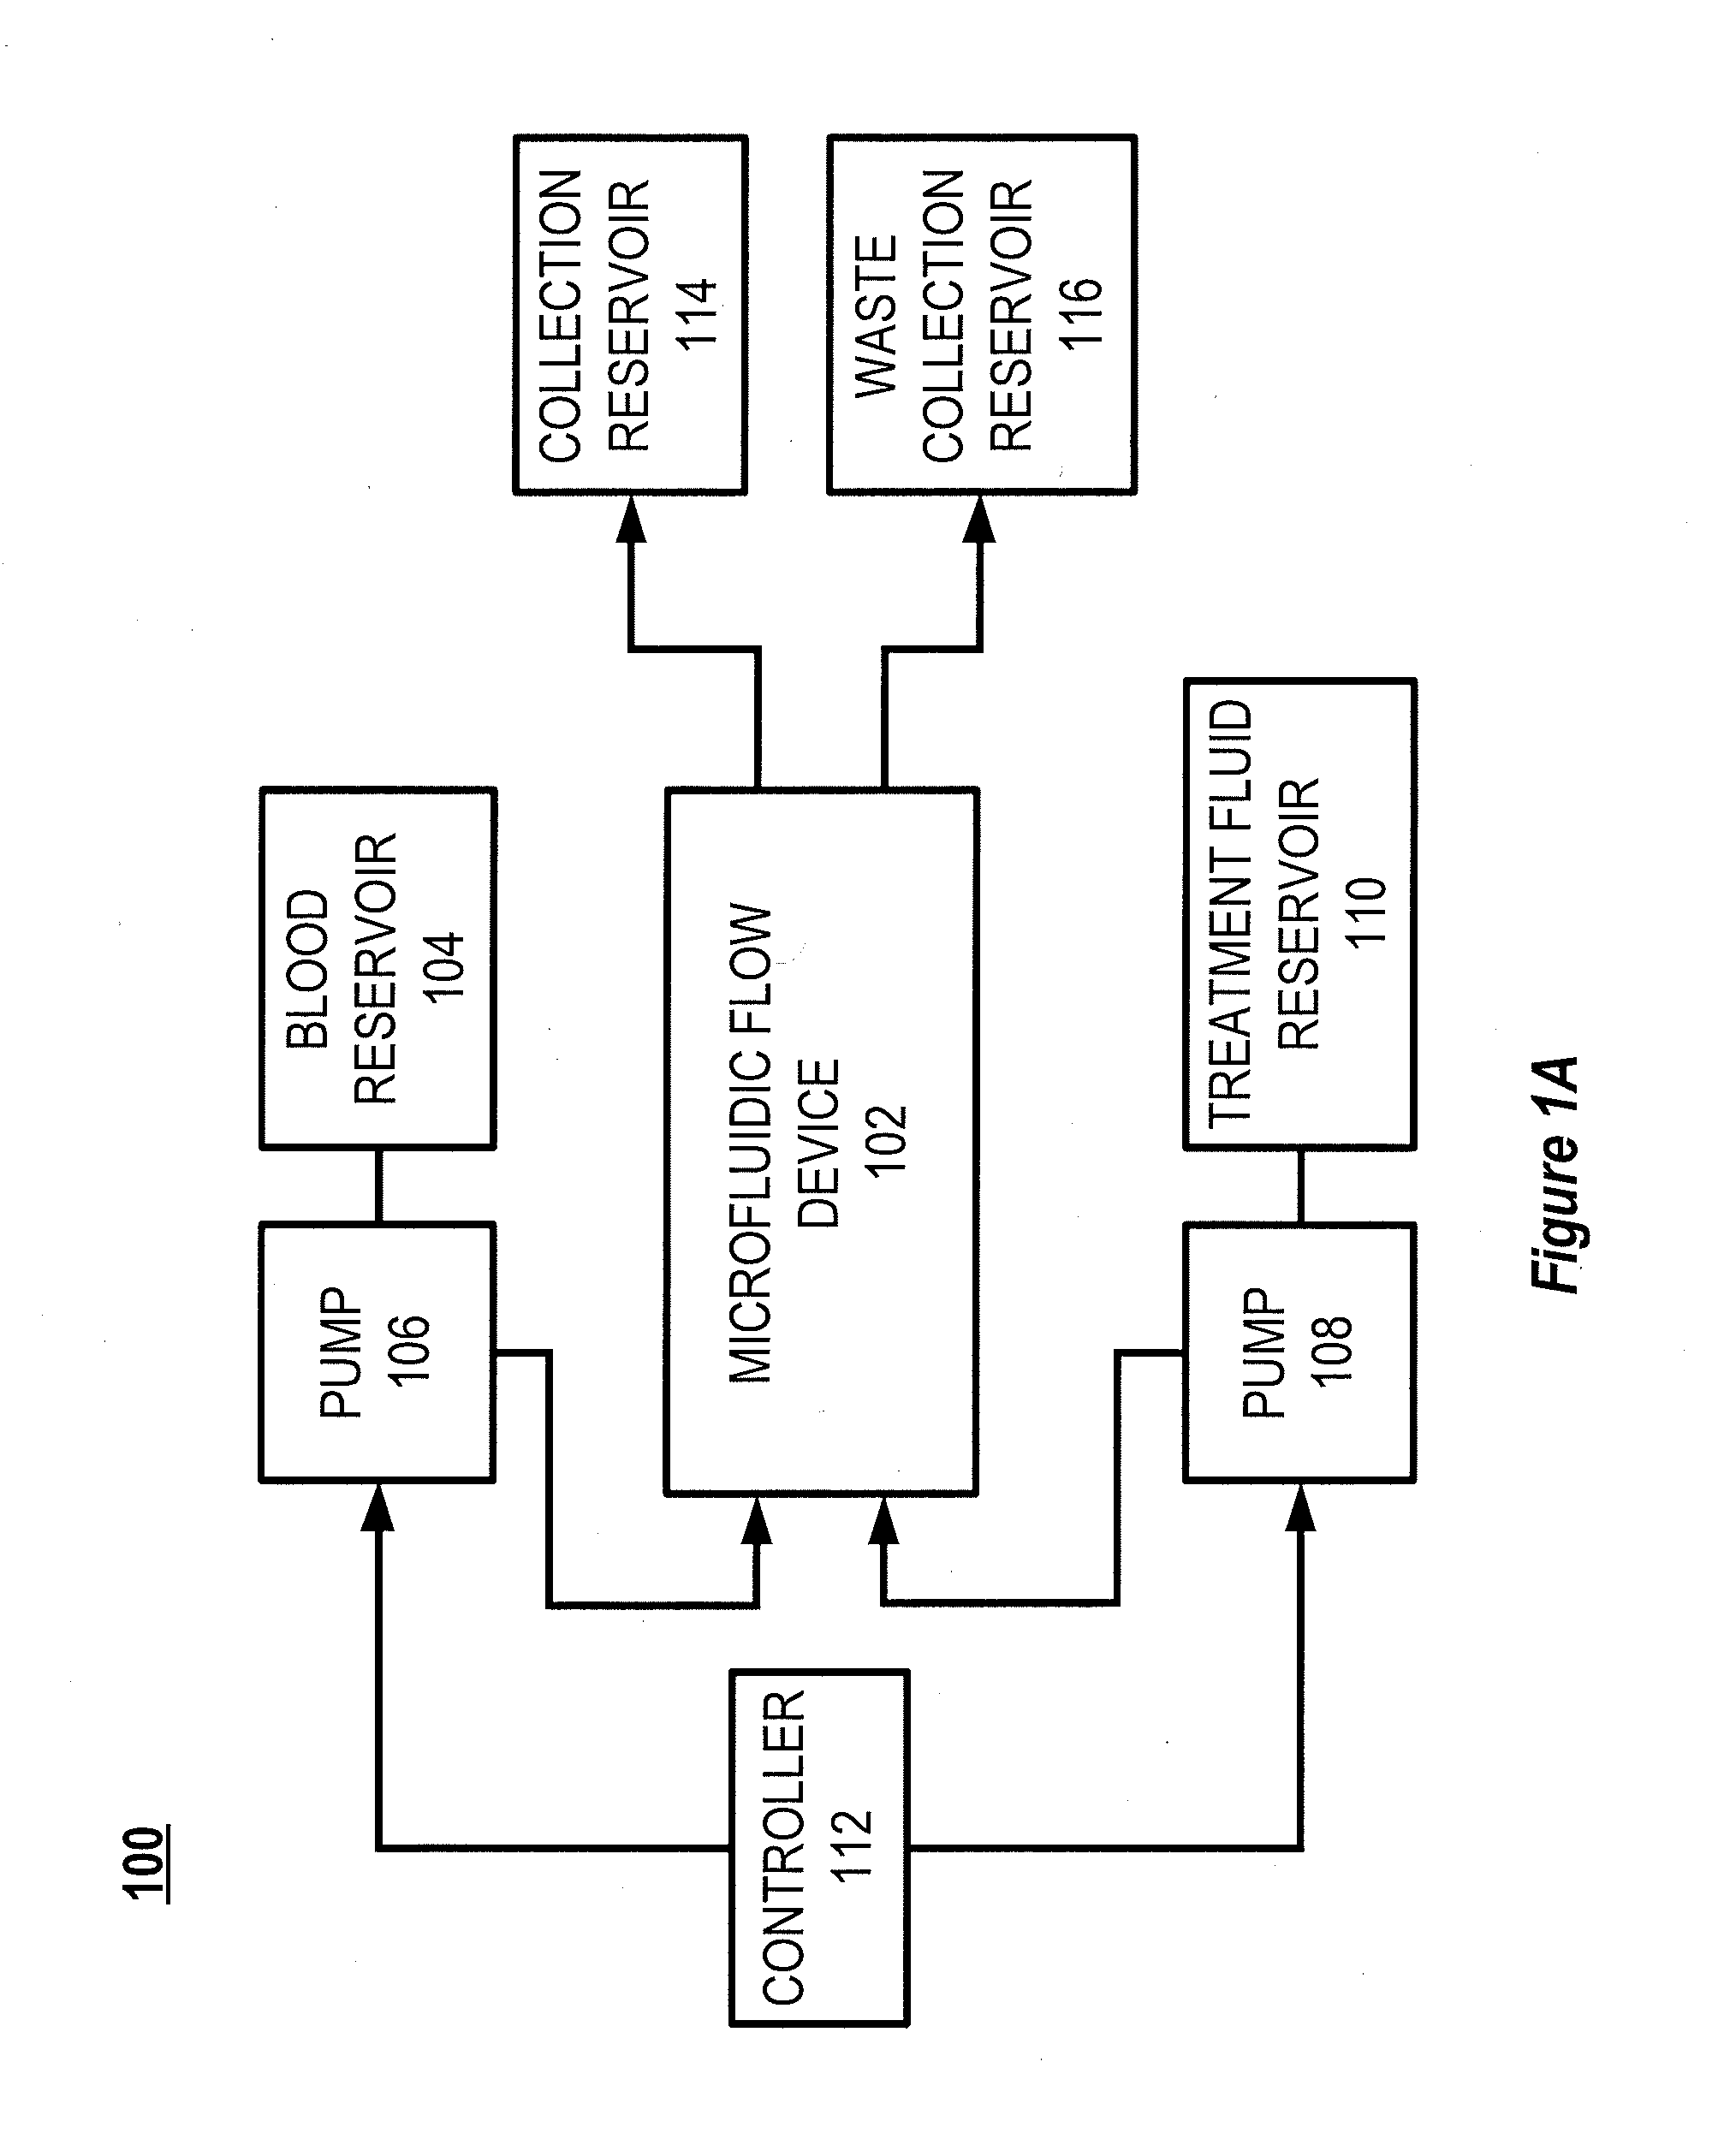 Microfluidic organ assist device incorporating boundary layer disrupters